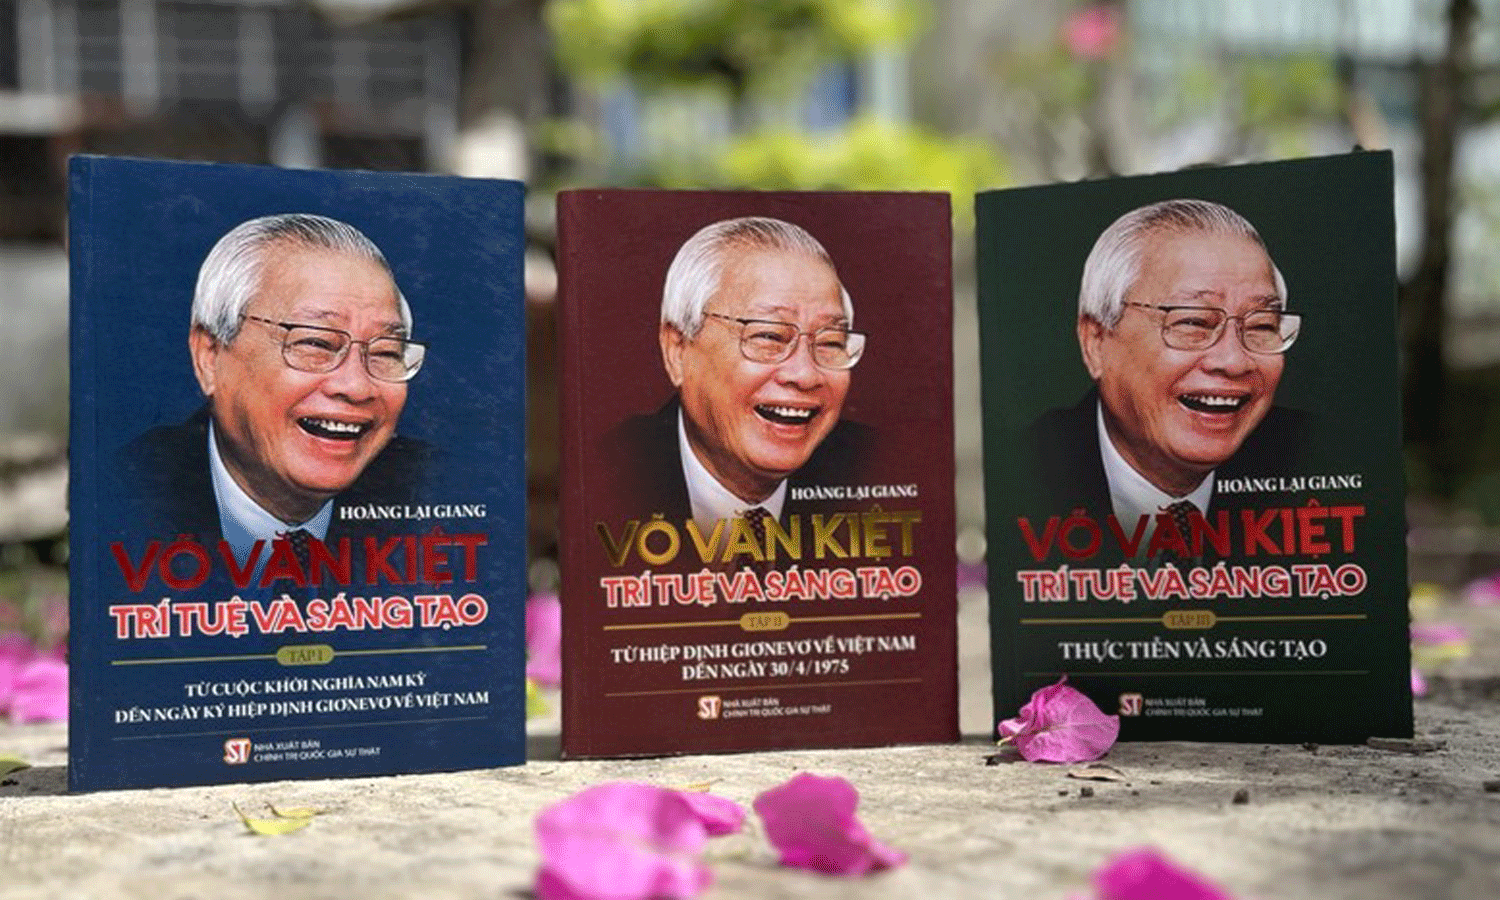 Book collection on late PM Vo Van Kiet released.